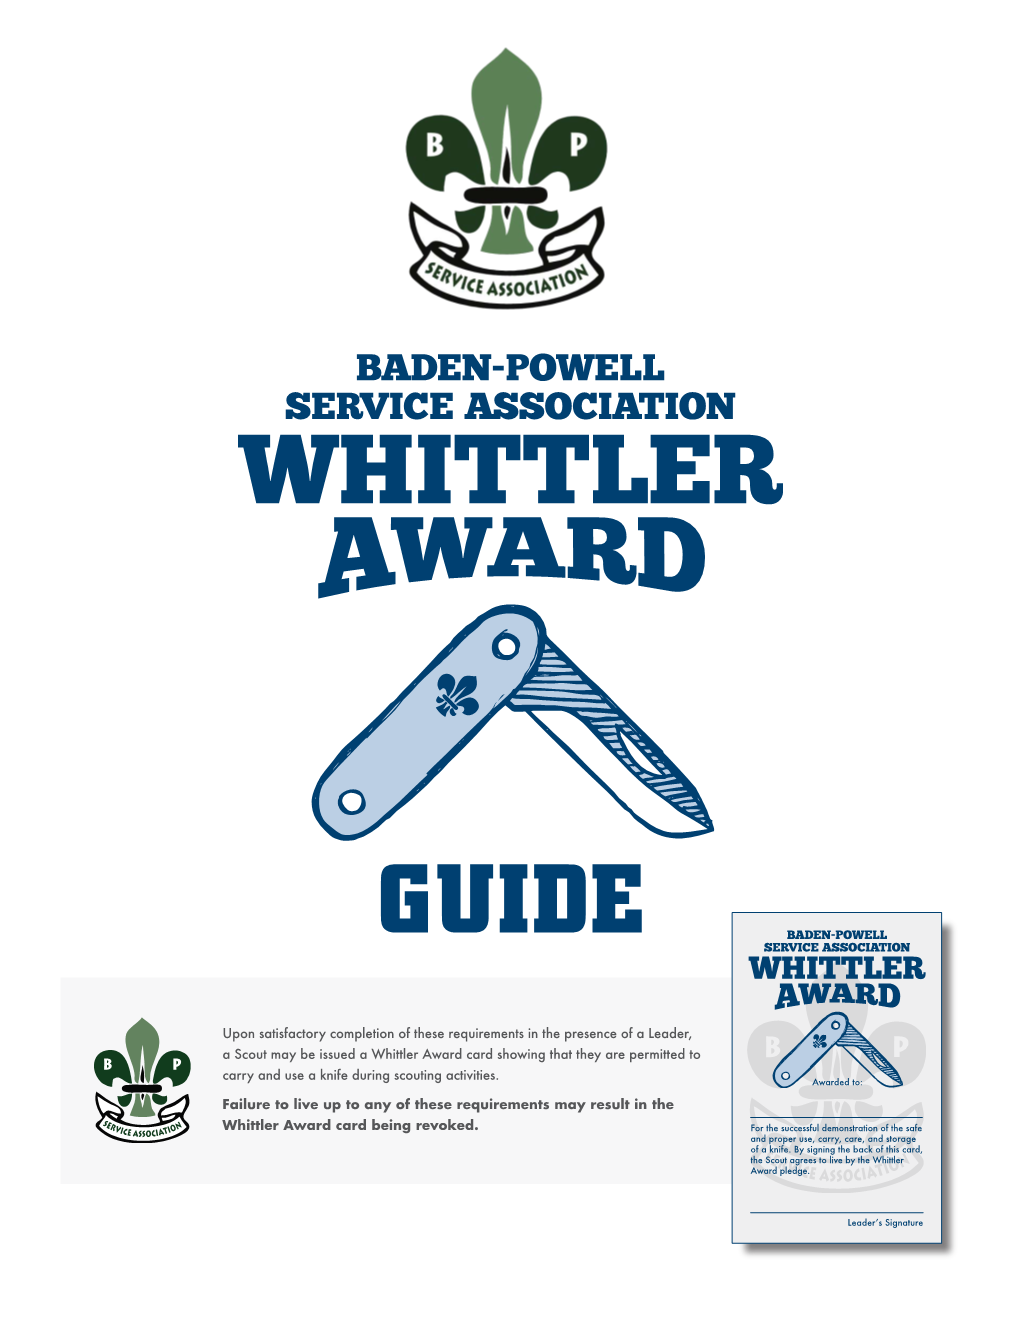 Upon Satisfactory Completion of These Requirements in the Presence of a Leader, a Scout May Be Issued a Whittler Award Card Showing That They Are Permitted To